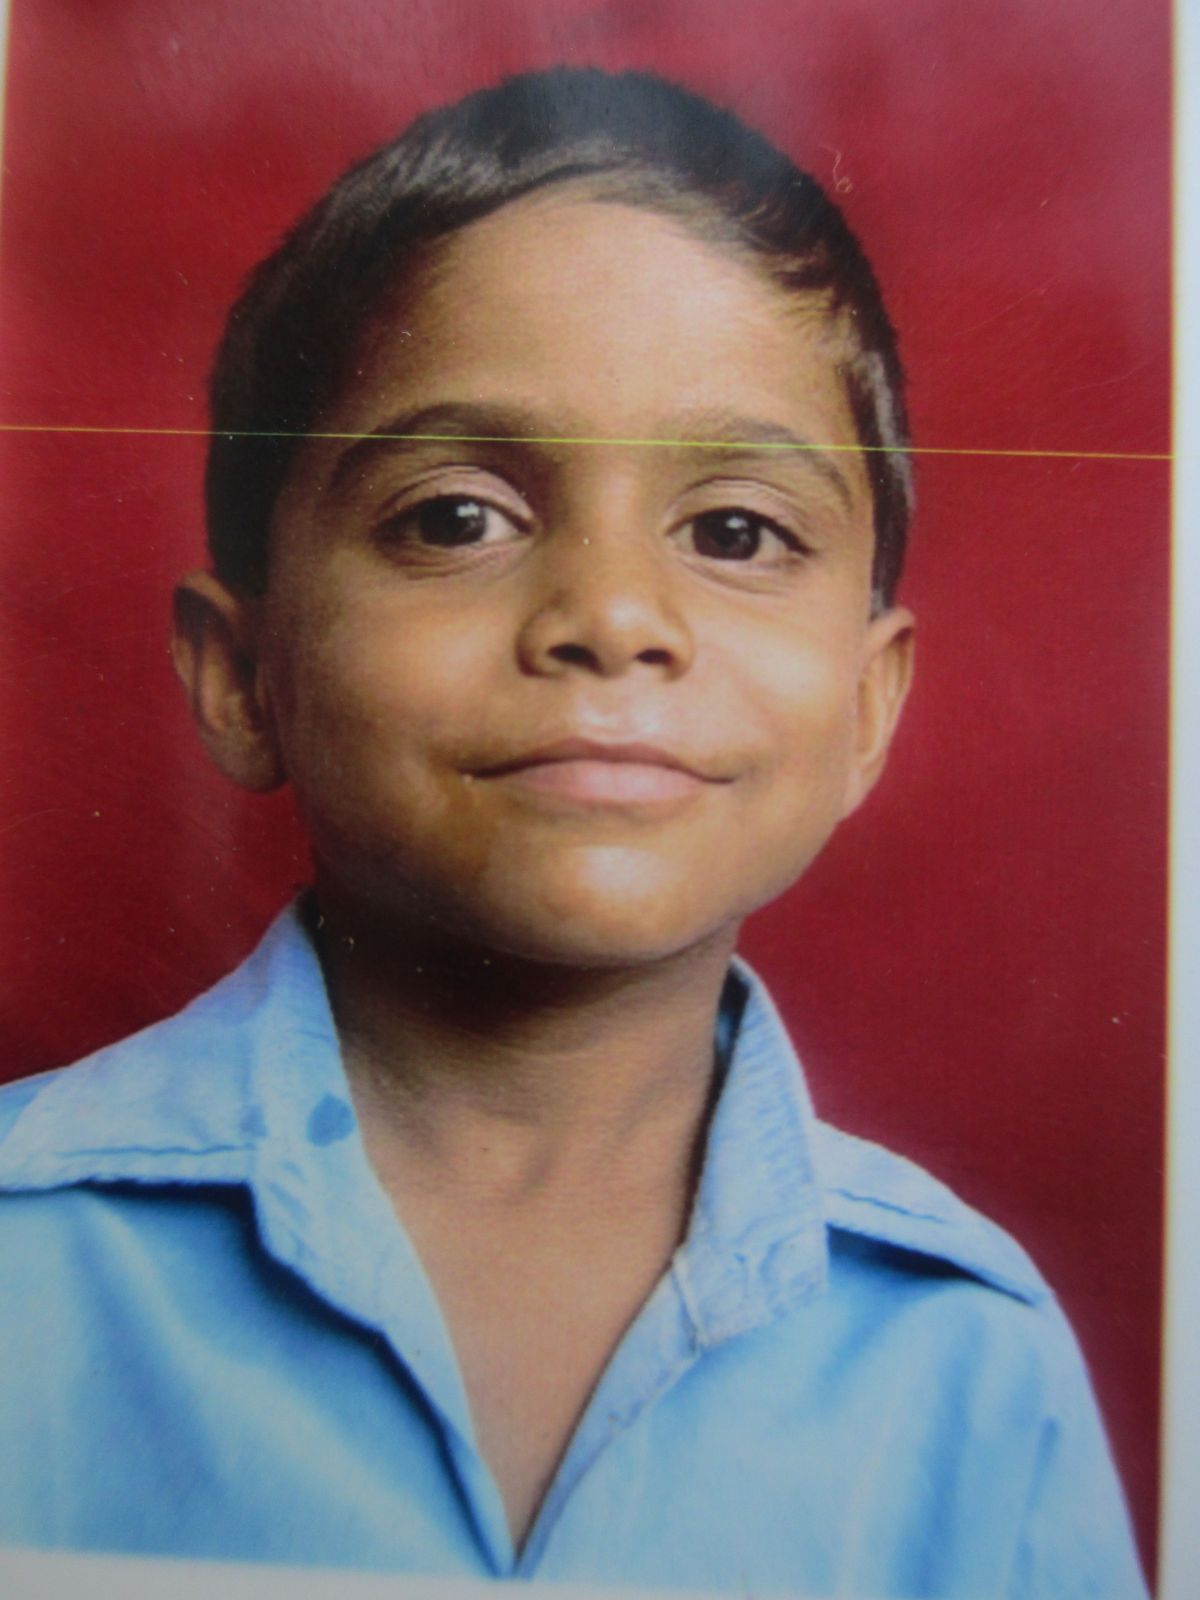 7-year-old boy tortured, killed for being Christian - Mission Network News